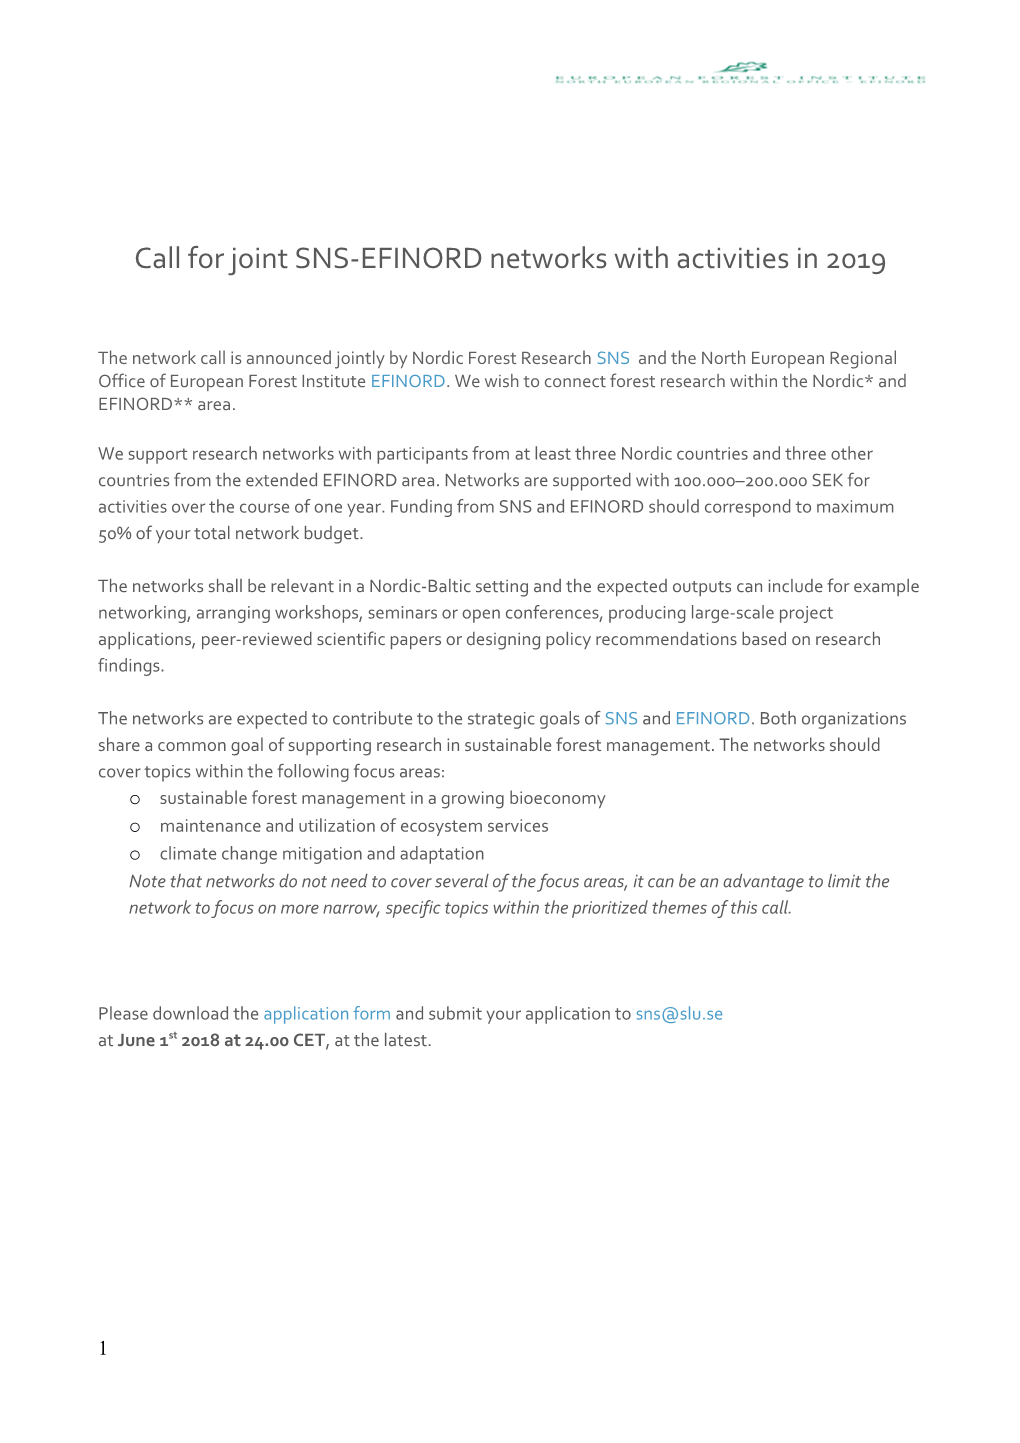 Call for Jointsns-Efinordnetworks with Activities in 2019